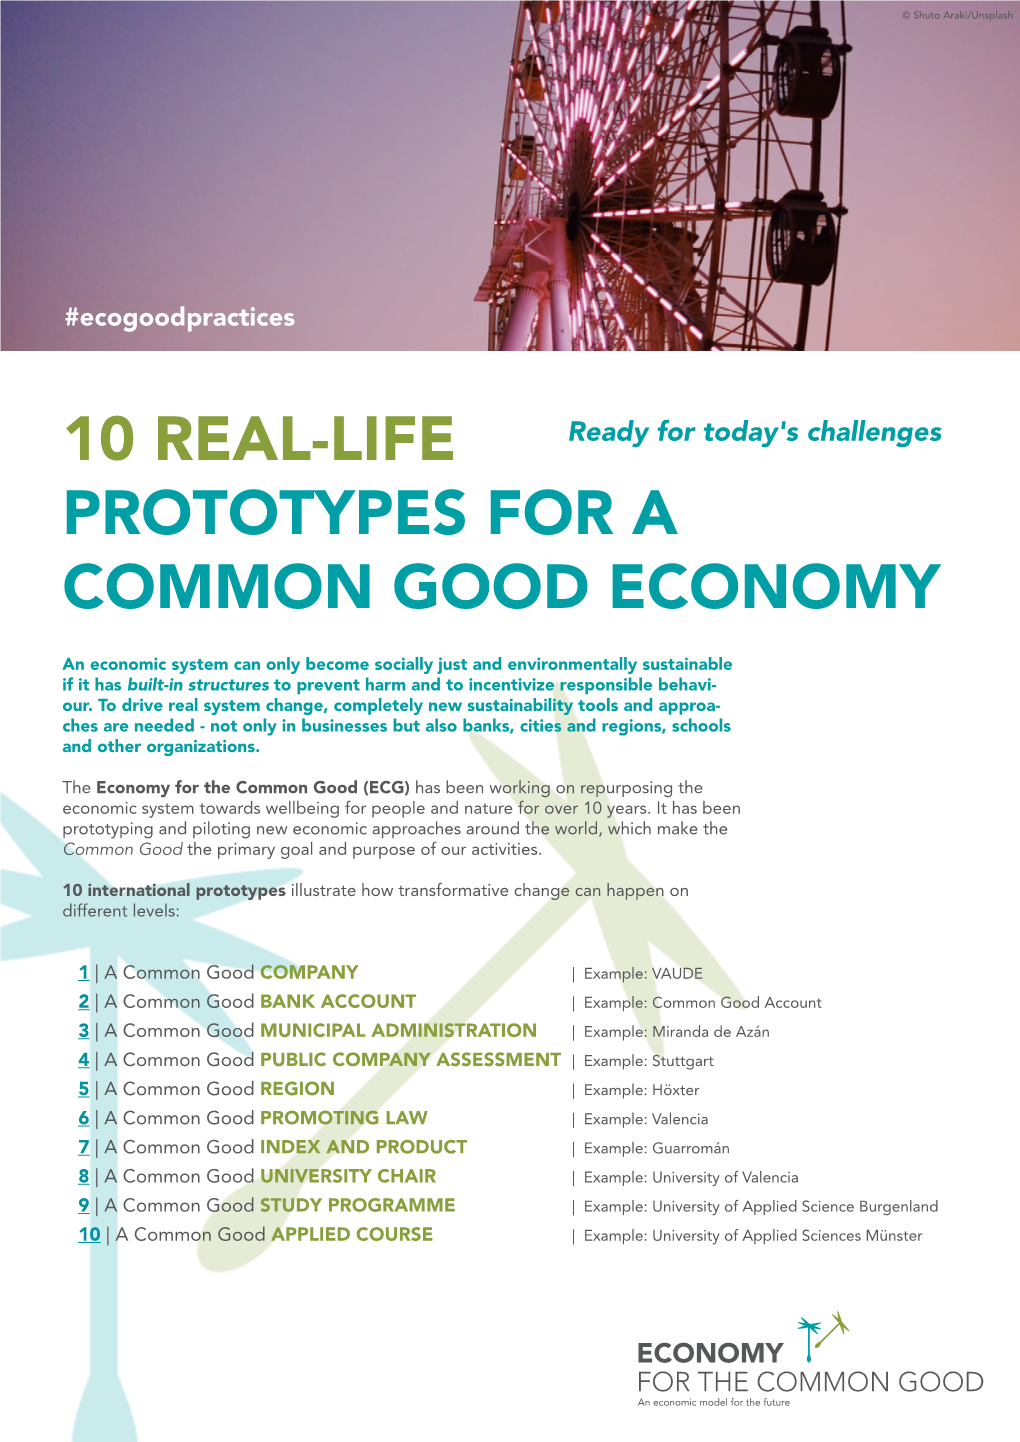 10 Real-Life Prototypes for a Common Good Economy